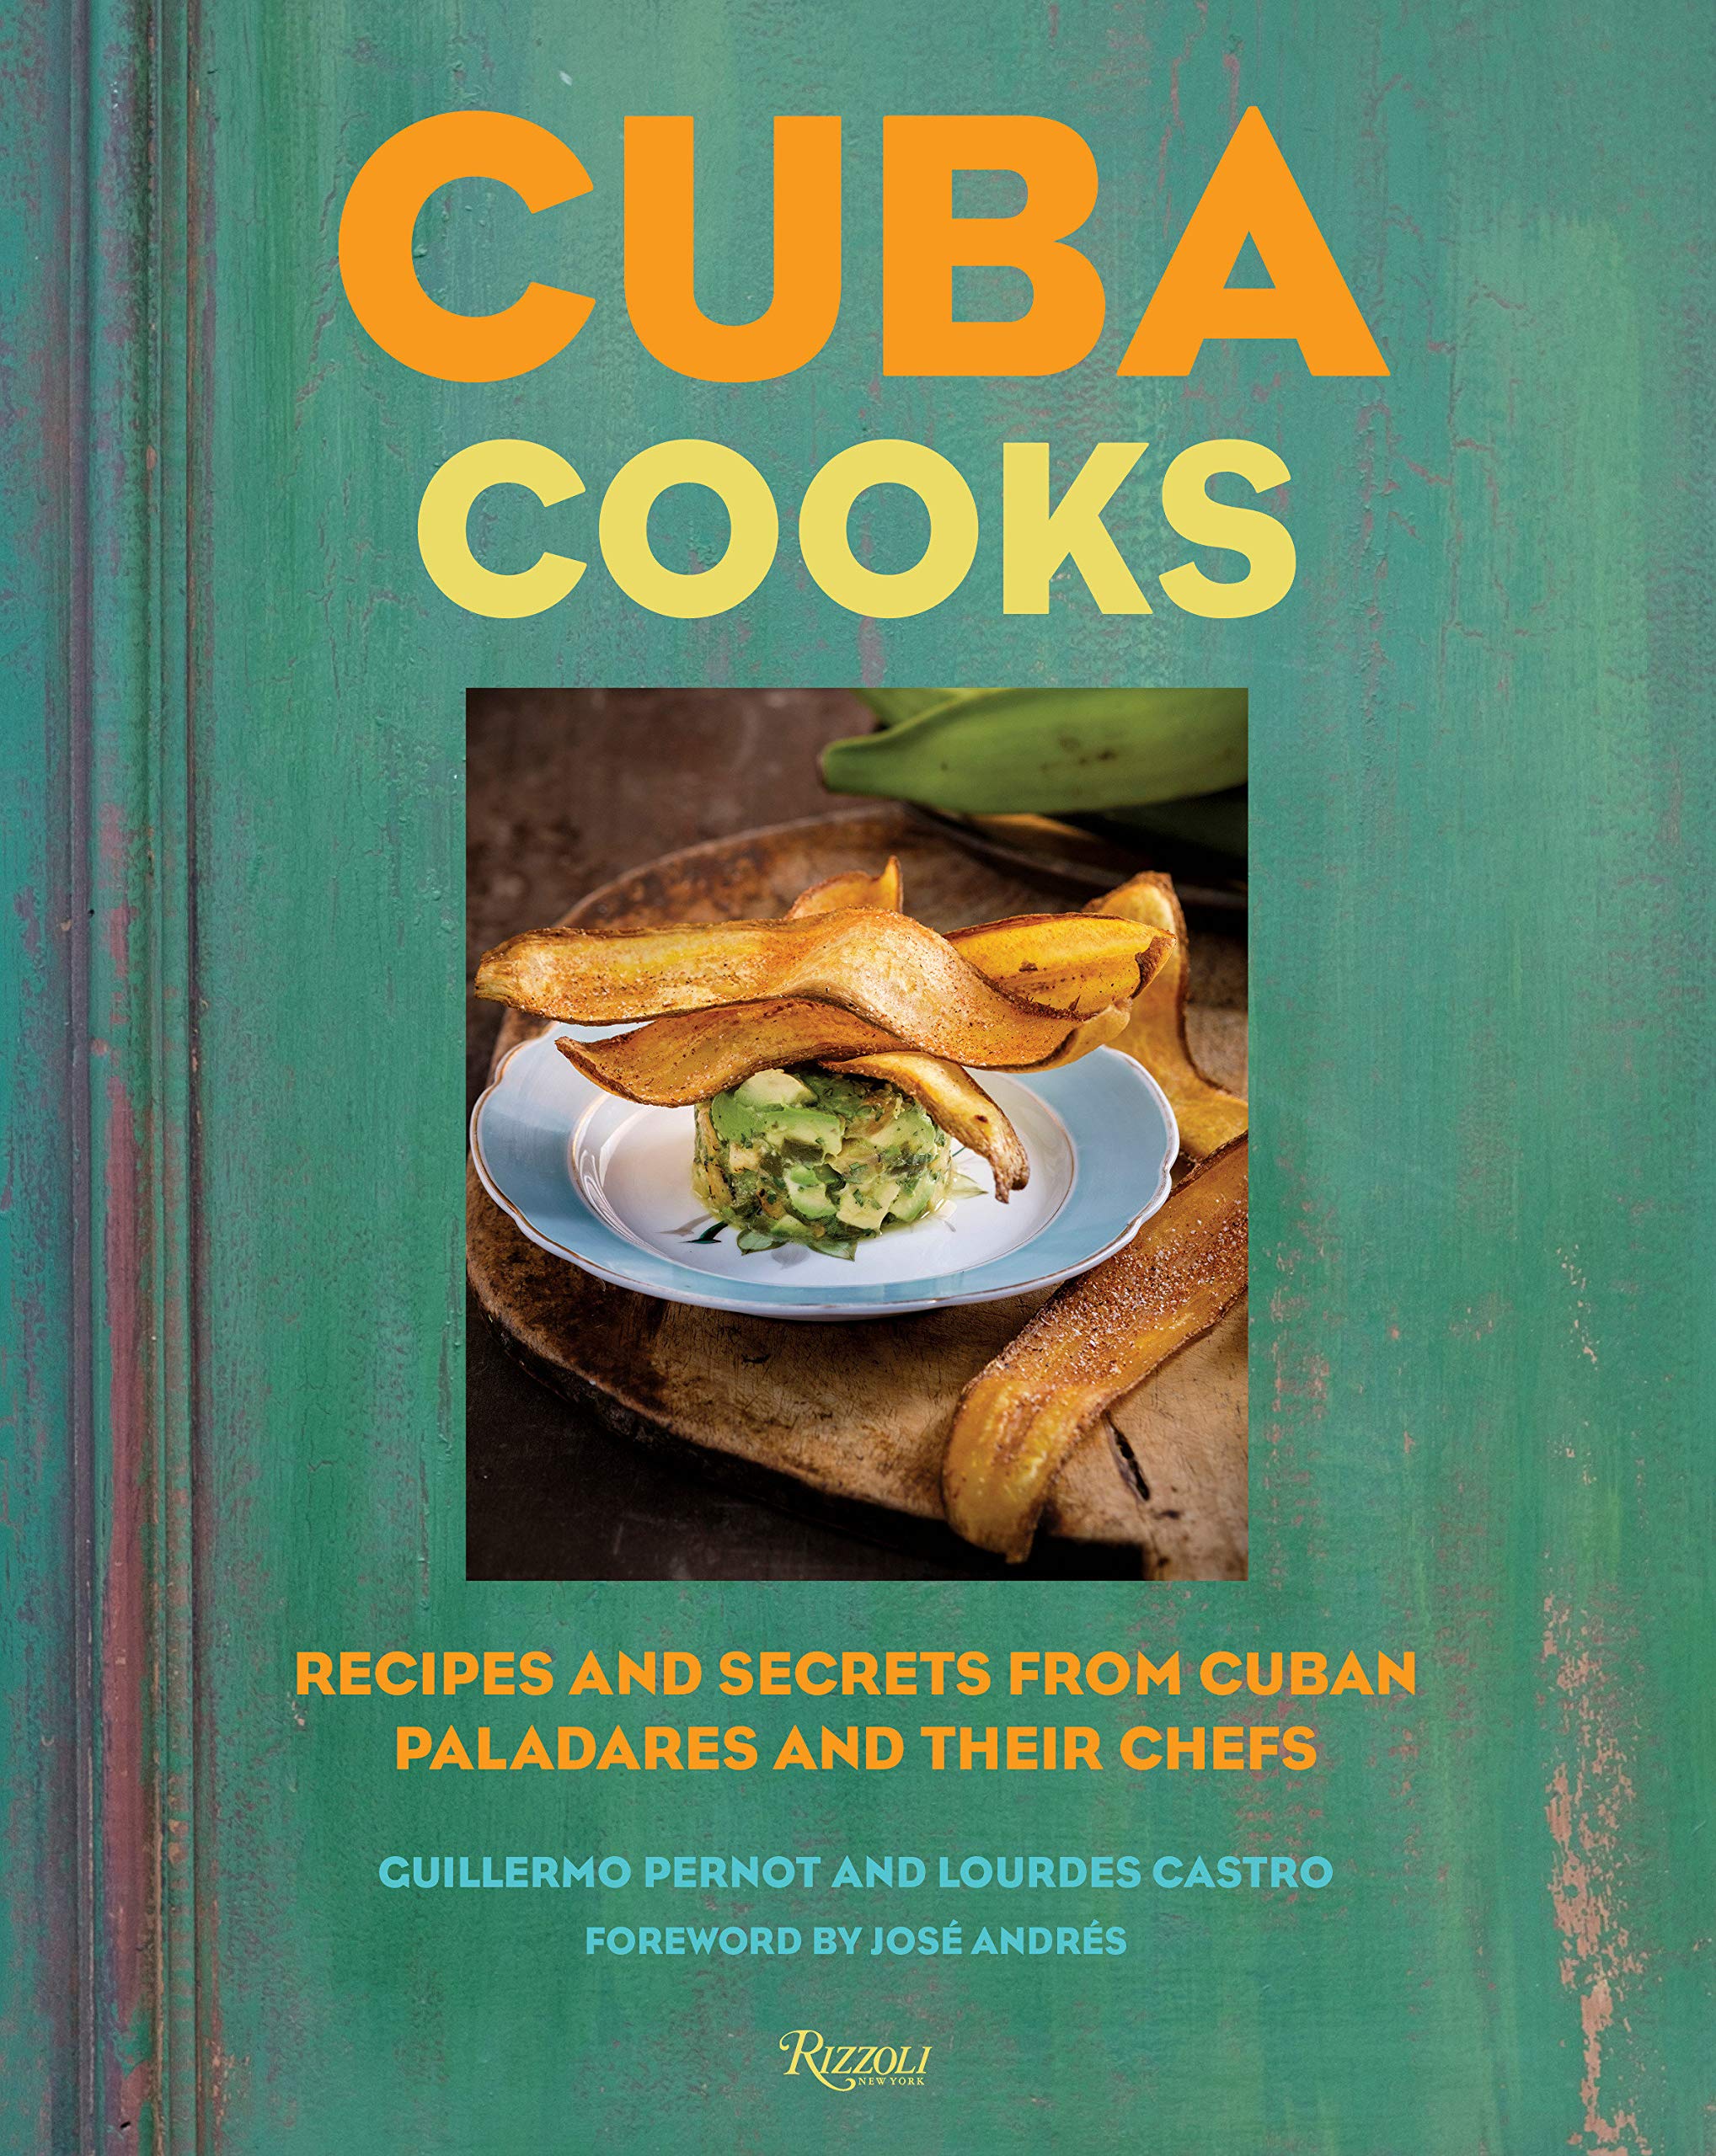 Cuba Cooks: Recipes and Secrets from Cuban Paladares and Their Chefs (Guillermo Pernot, Lourdes Castro)